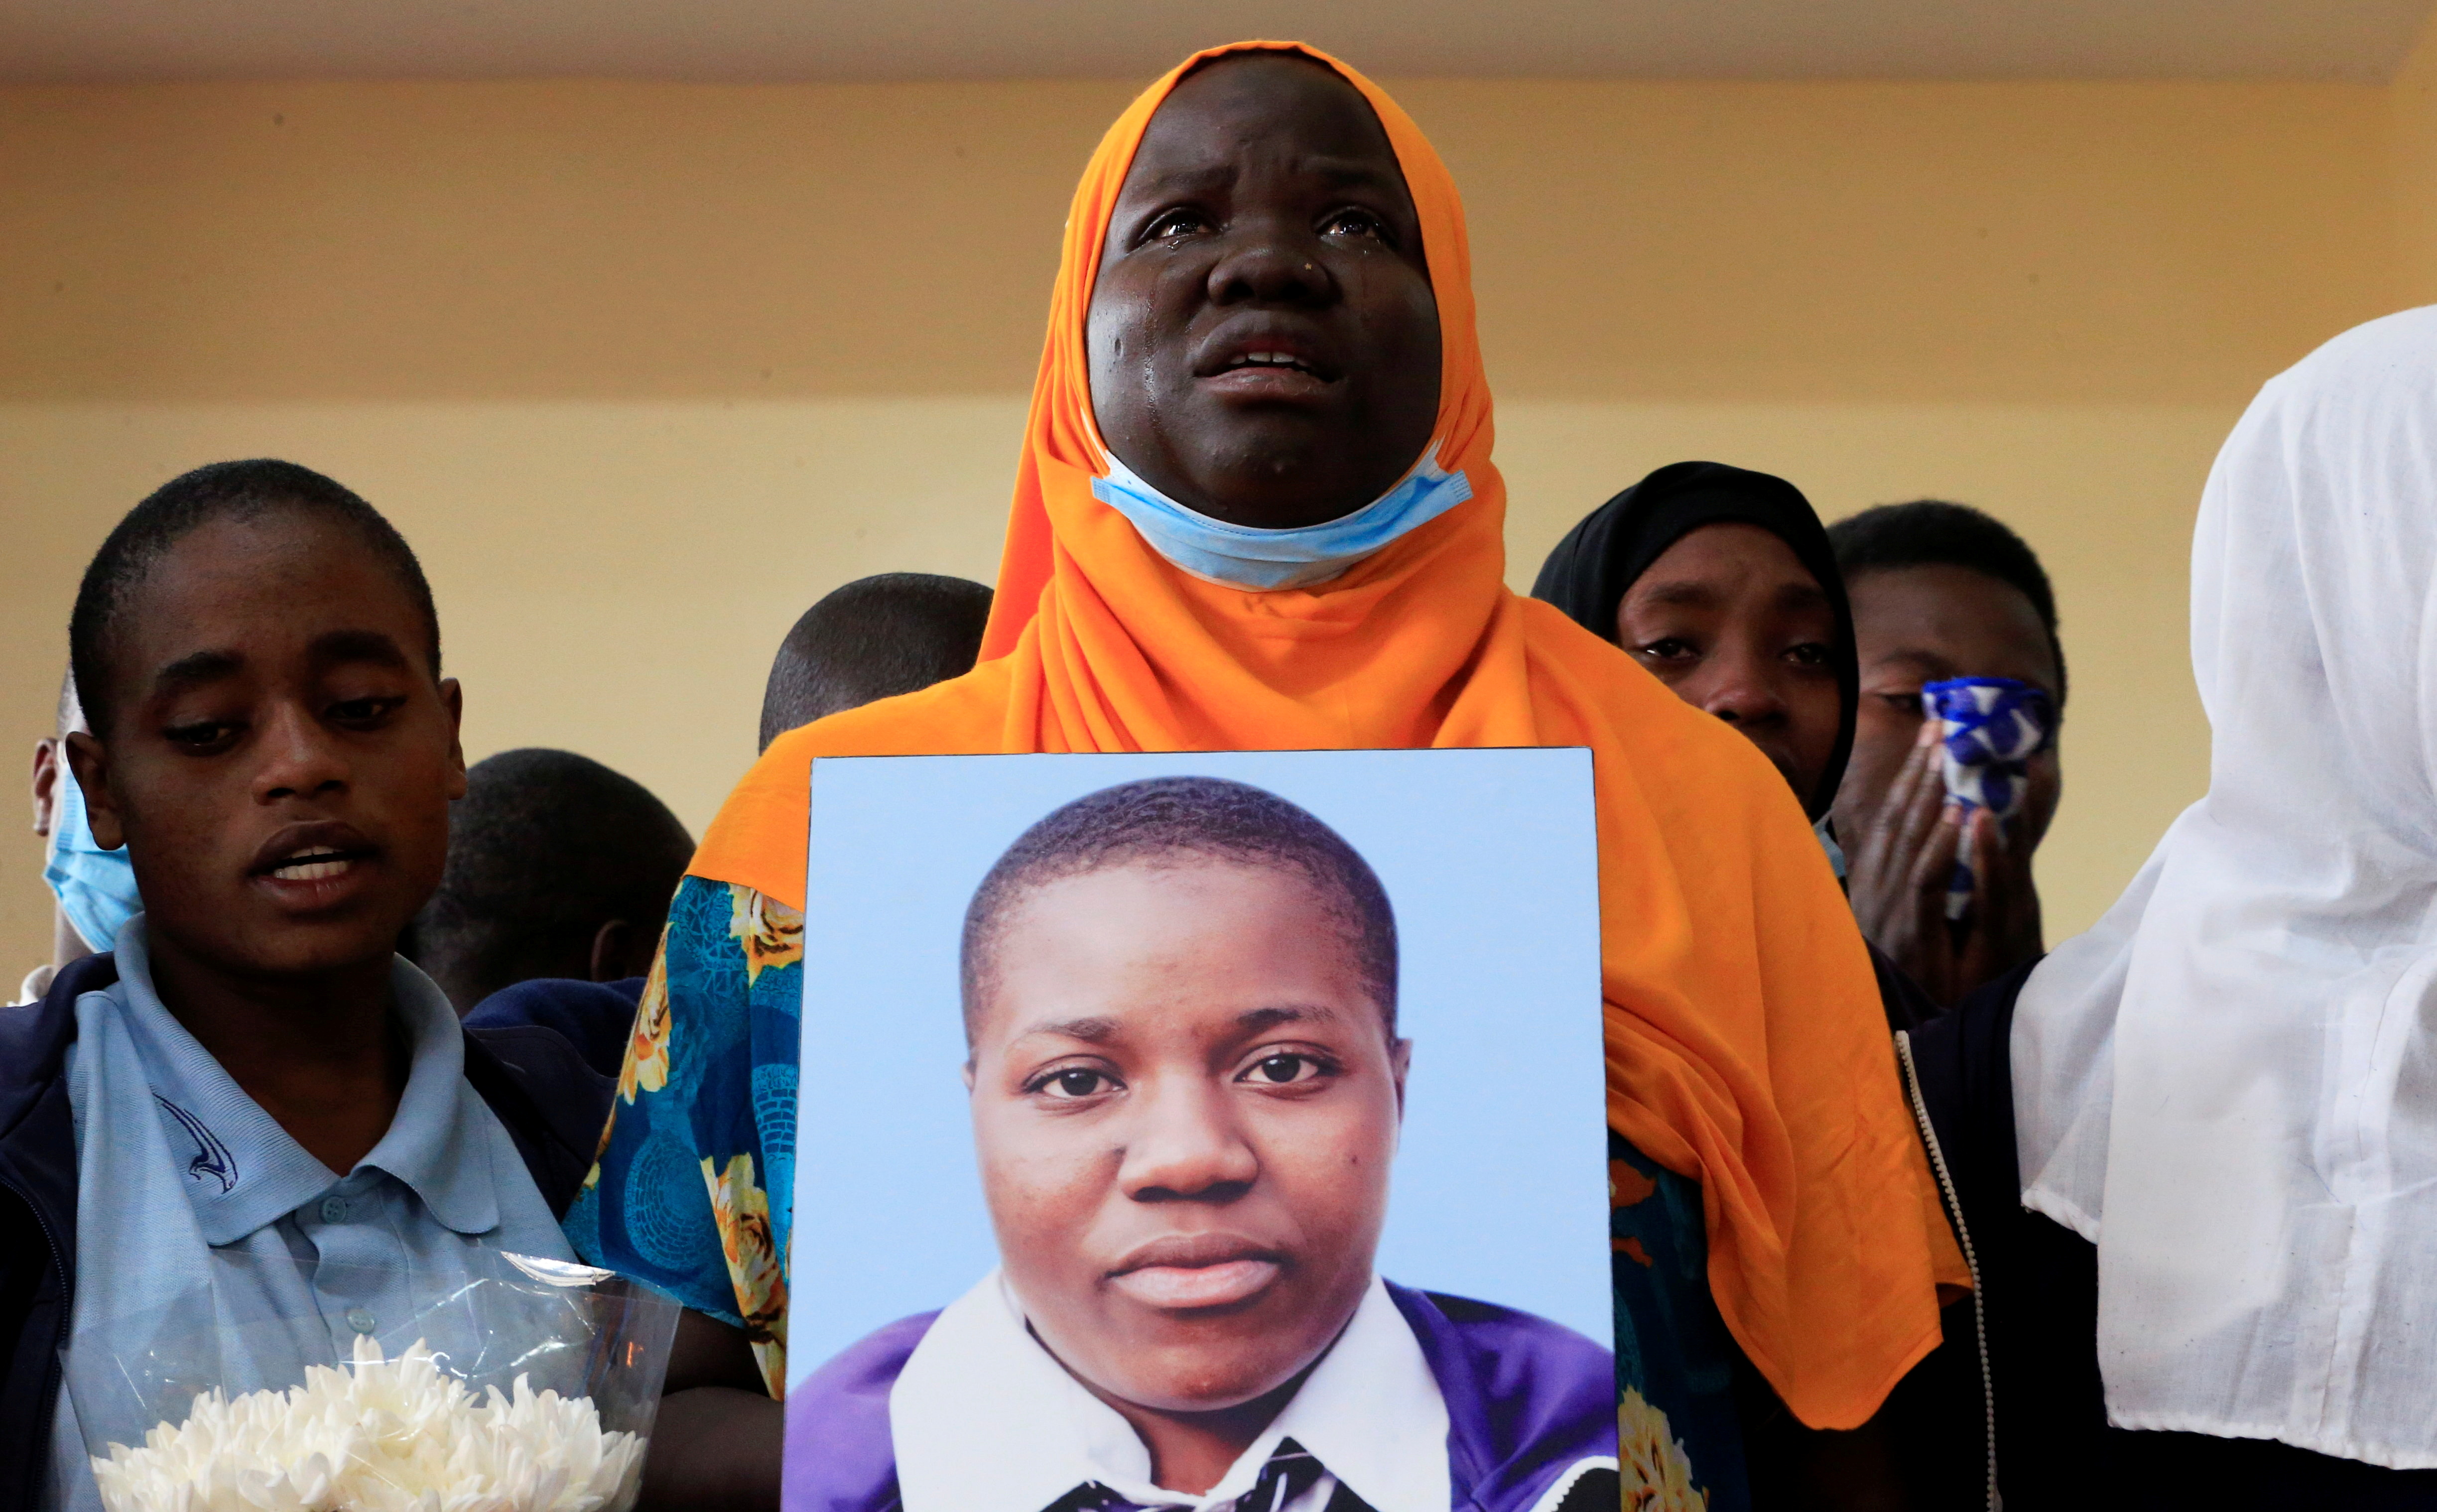 Dafida Hassan Yusuf, form four class teacher at the Kibera Girls School Soccer Academy (KGSA), reacts after attending the memorial service for Cynthia Makokha (on the photograph), a teenage student who was raped and killed as she travelled home for school holidays, in Kibera district of Nairobi, Kenya October 15, 2021. REUTERS/Thomas Mukoya 